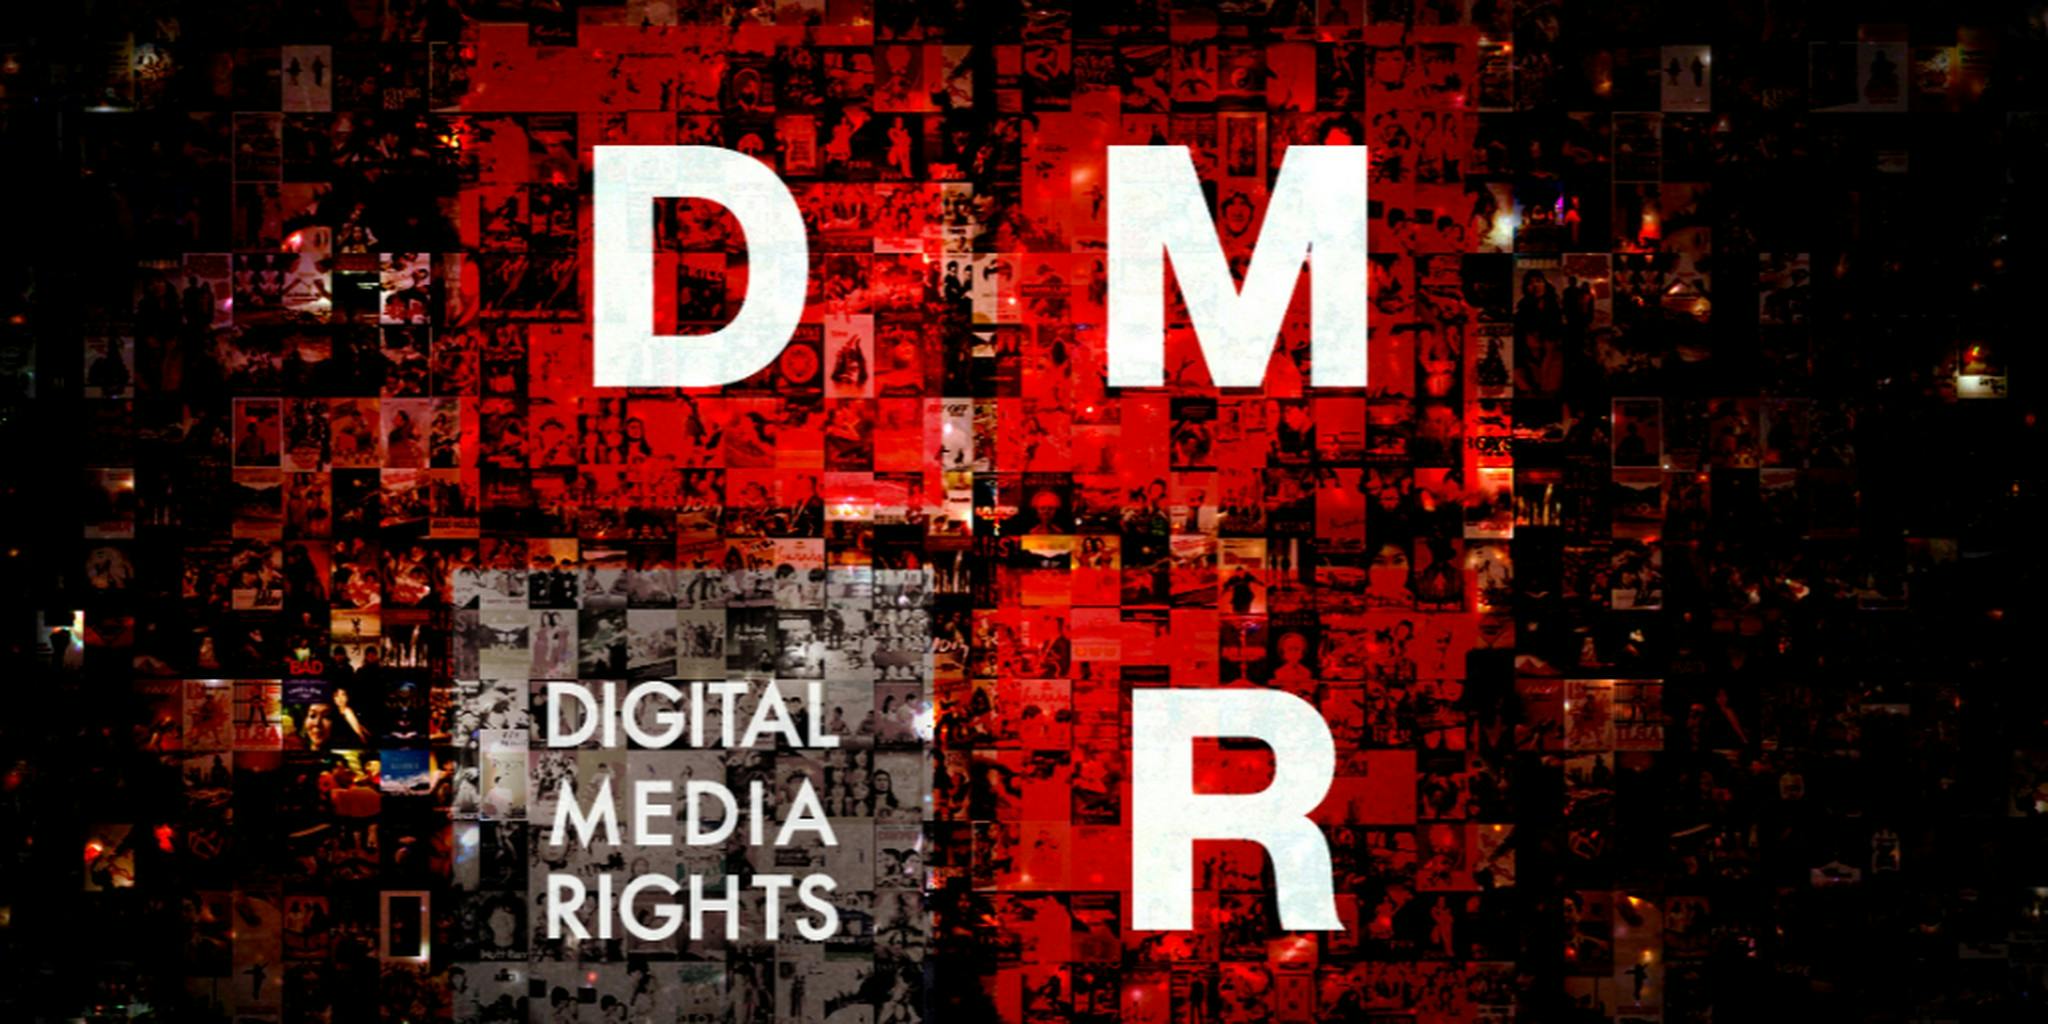 Media rights. Digital Медиа. Where to go.